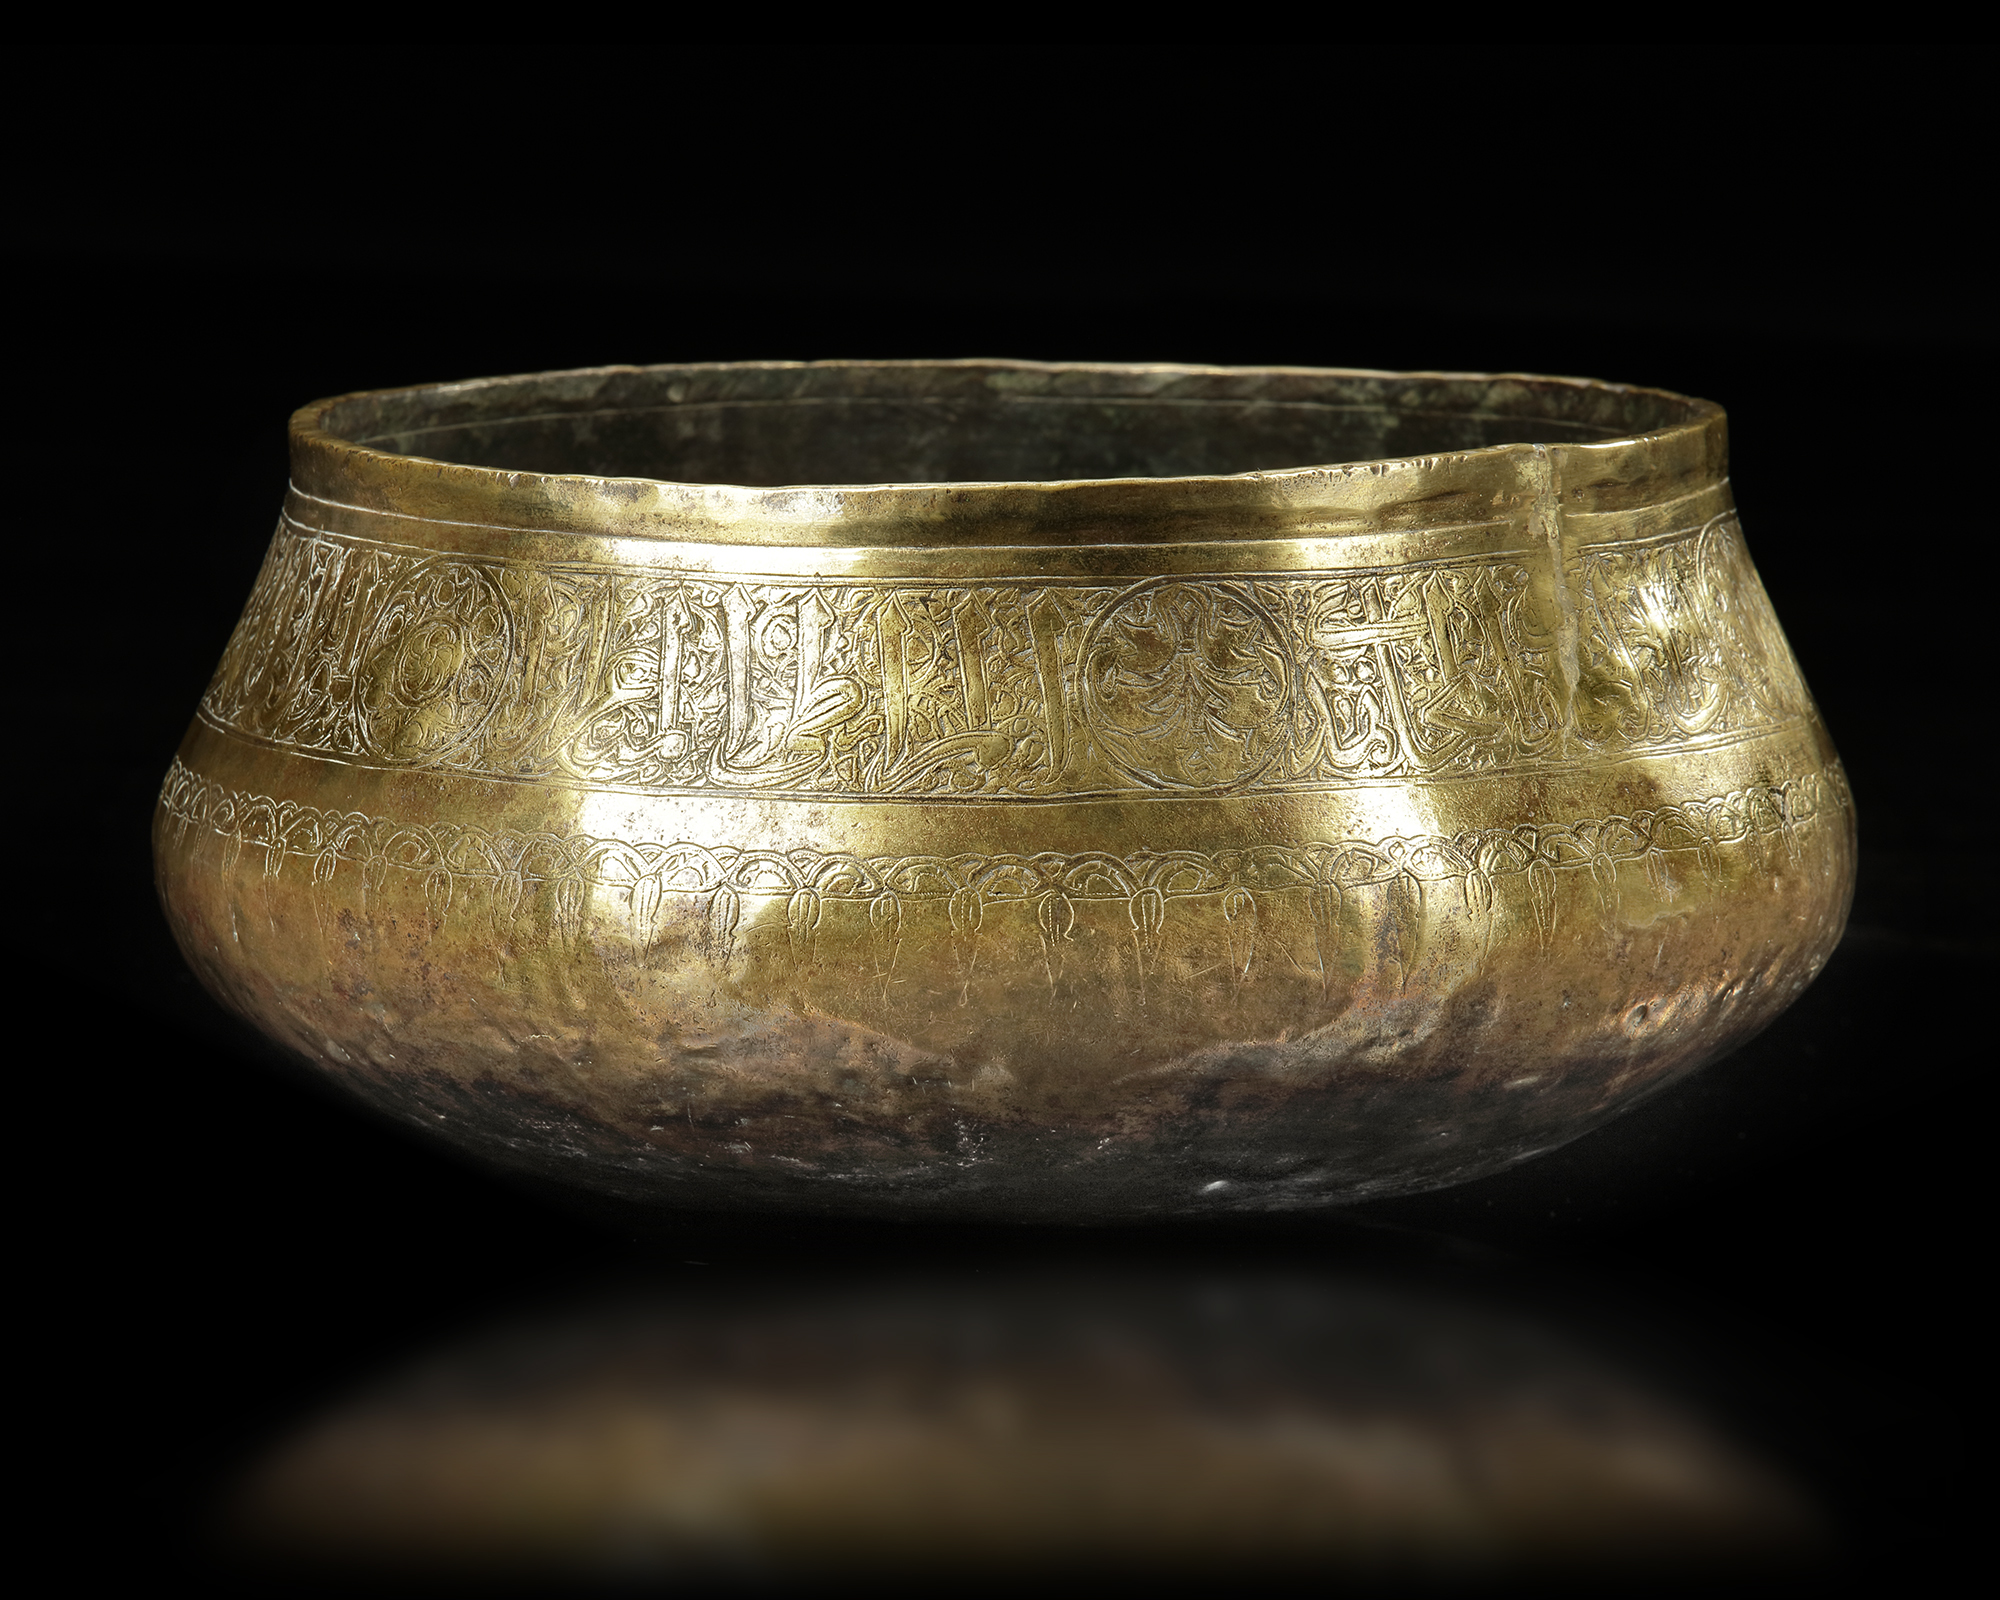 A MAMLUK BRASS BOWL WITH INSCRIPTIONS, EGYPT OR SYRIA, 14TH CENTURY